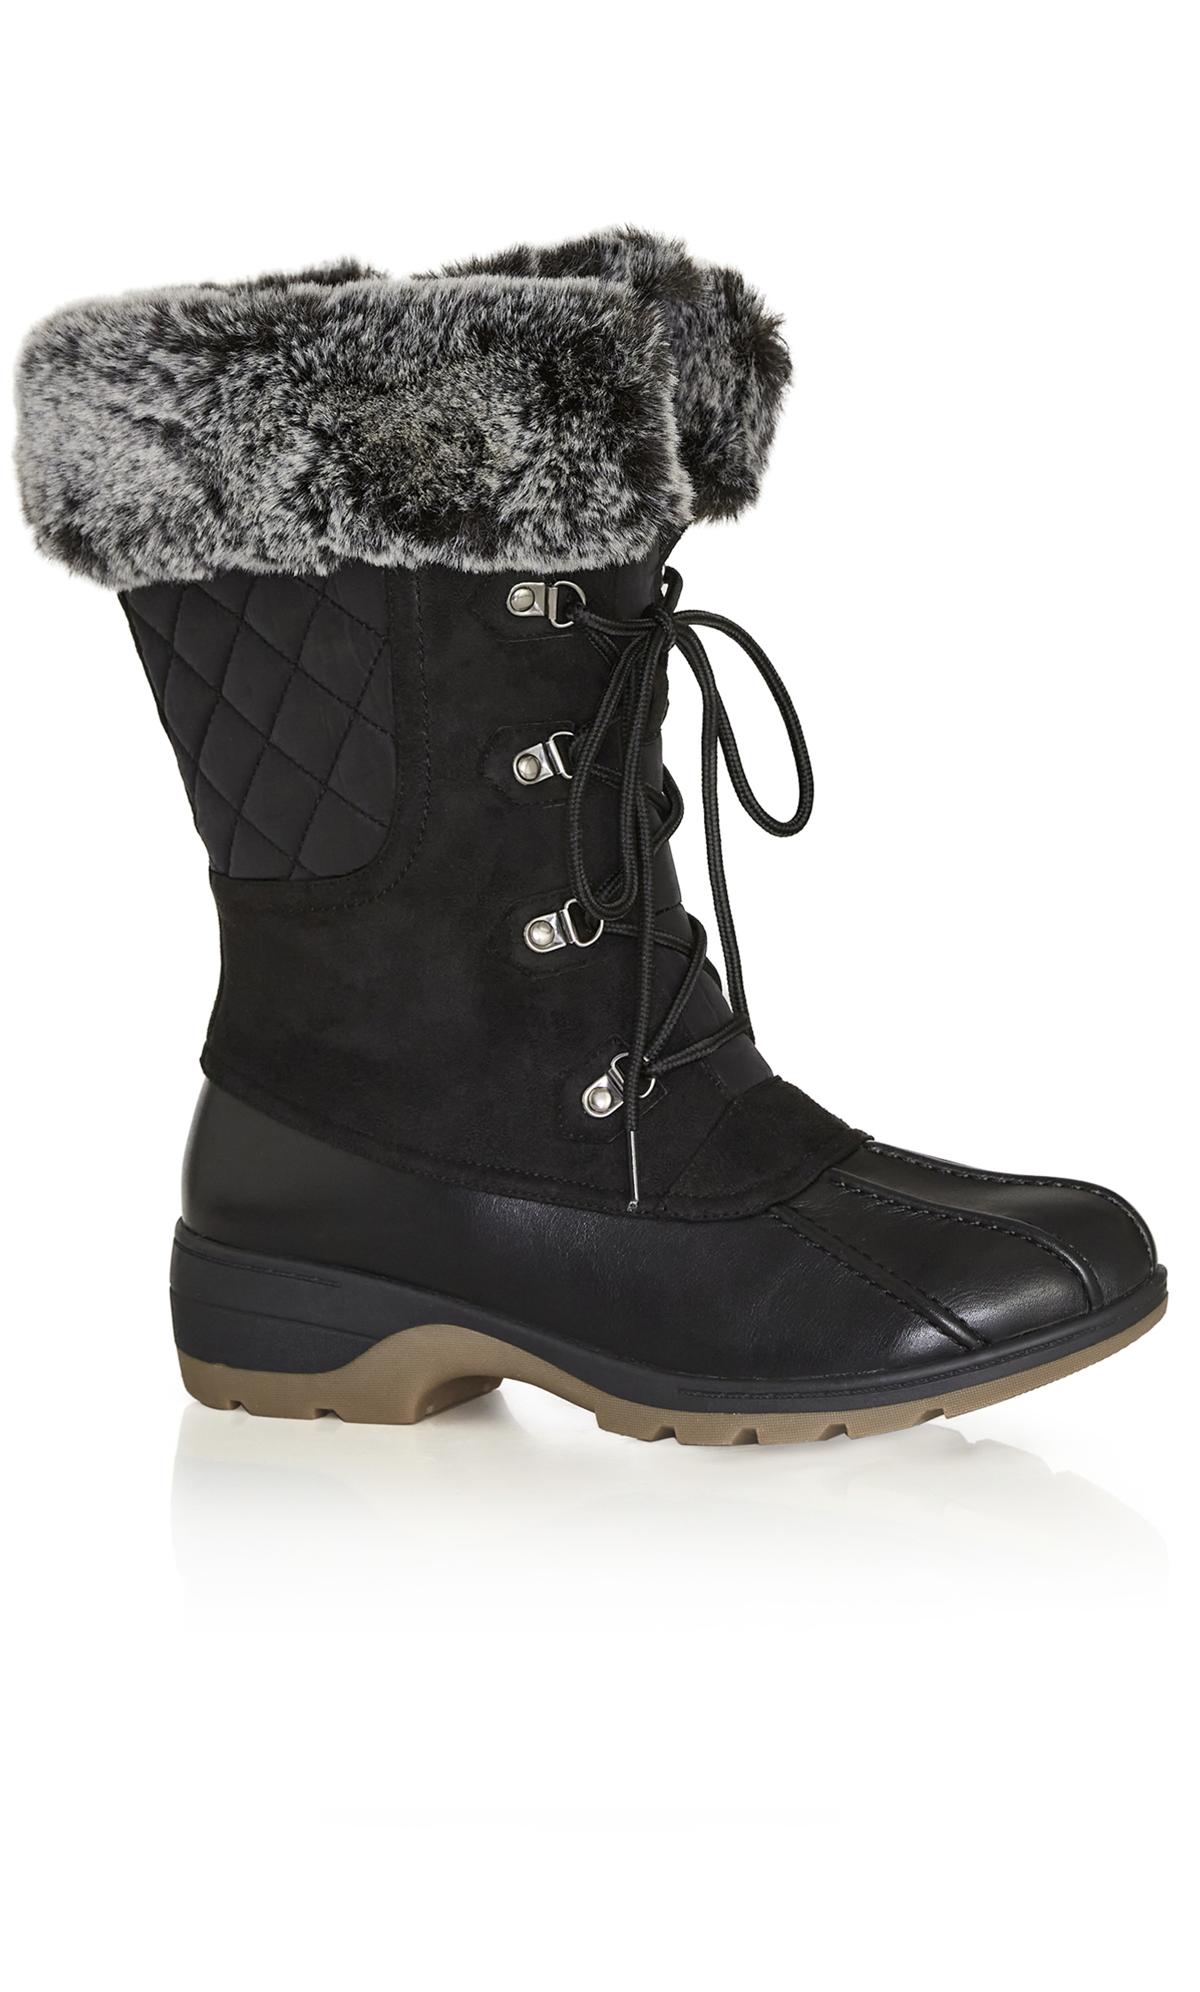 Evans Black Faux Suede Quilted Snow Boots 1